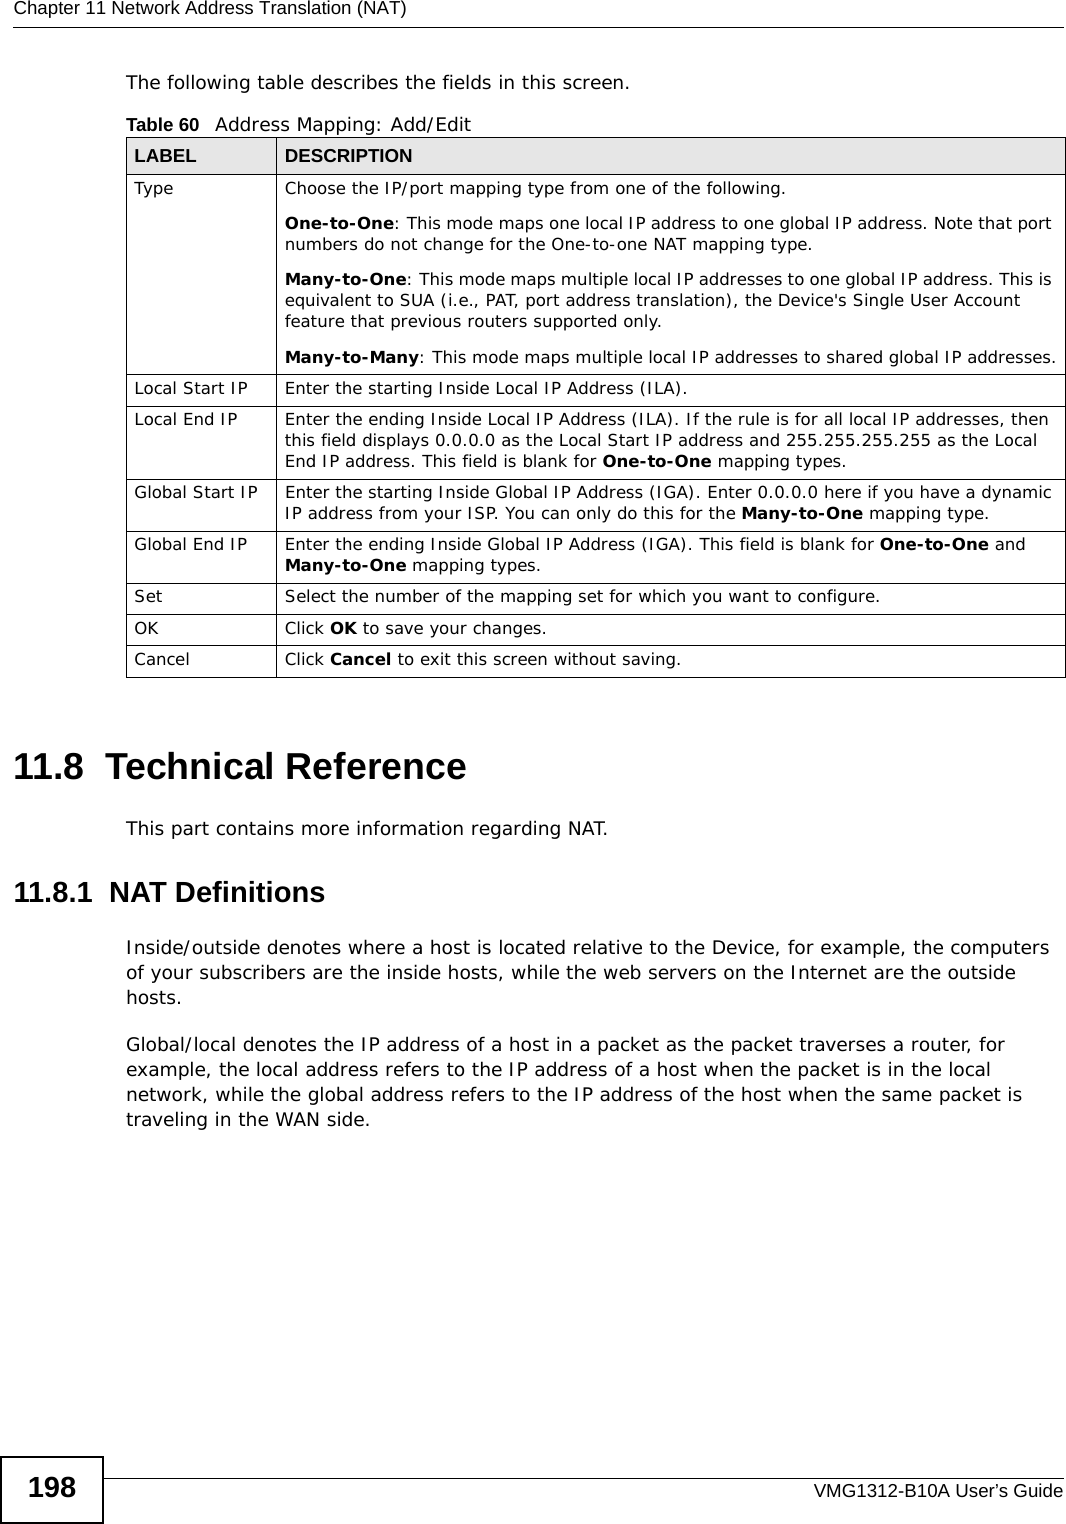 Chapter 11 Network Address Translation (NAT)VMG1312-B10A User’s Guide198The following table describes the fields in this screen.11.8  Technical ReferenceThis part contains more information regarding NAT.11.8.1  NAT DefinitionsInside/outside denotes where a host is located relative to the Device, for example, the computers of your subscribers are the inside hosts, while the web servers on the Internet are the outside hosts. Global/local denotes the IP address of a host in a packet as the packet traverses a router, for example, the local address refers to the IP address of a host when the packet is in the local network, while the global address refers to the IP address of the host when the same packet is traveling in the WAN side. Table 60   Address Mapping: Add/EditLABEL DESCRIPTIONType Choose the IP/port mapping type from one of the following.One-to-One: This mode maps one local IP address to one global IP address. Note that port numbers do not change for the One-to-one NAT mapping type.Many-to-One: This mode maps multiple local IP addresses to one global IP address. This is equivalent to SUA (i.e., PAT, port address translation), the Device&apos;s Single User Account feature that previous routers supported only. Many-to-Many: This mode maps multiple local IP addresses to shared global IP addresses.Local Start IP Enter the starting Inside Local IP Address (ILA).Local End IP Enter the ending Inside Local IP Address (ILA). If the rule is for all local IP addresses, then this field displays 0.0.0.0 as the Local Start IP address and 255.255.255.255 as the Local End IP address. This field is blank for One-to-One mapping types.Global Start IP Enter the starting Inside Global IP Address (IGA). Enter 0.0.0.0 here if you have a dynamic IP address from your ISP. You can only do this for the Many-to-One mapping type. Global End IP Enter the ending Inside Global IP Address (IGA). This field is blank for One-to-One and Many-to-One mapping types.Set Select the number of the mapping set for which you want to configure.OK Click OK to save your changes.Cancel Click Cancel to exit this screen without saving.